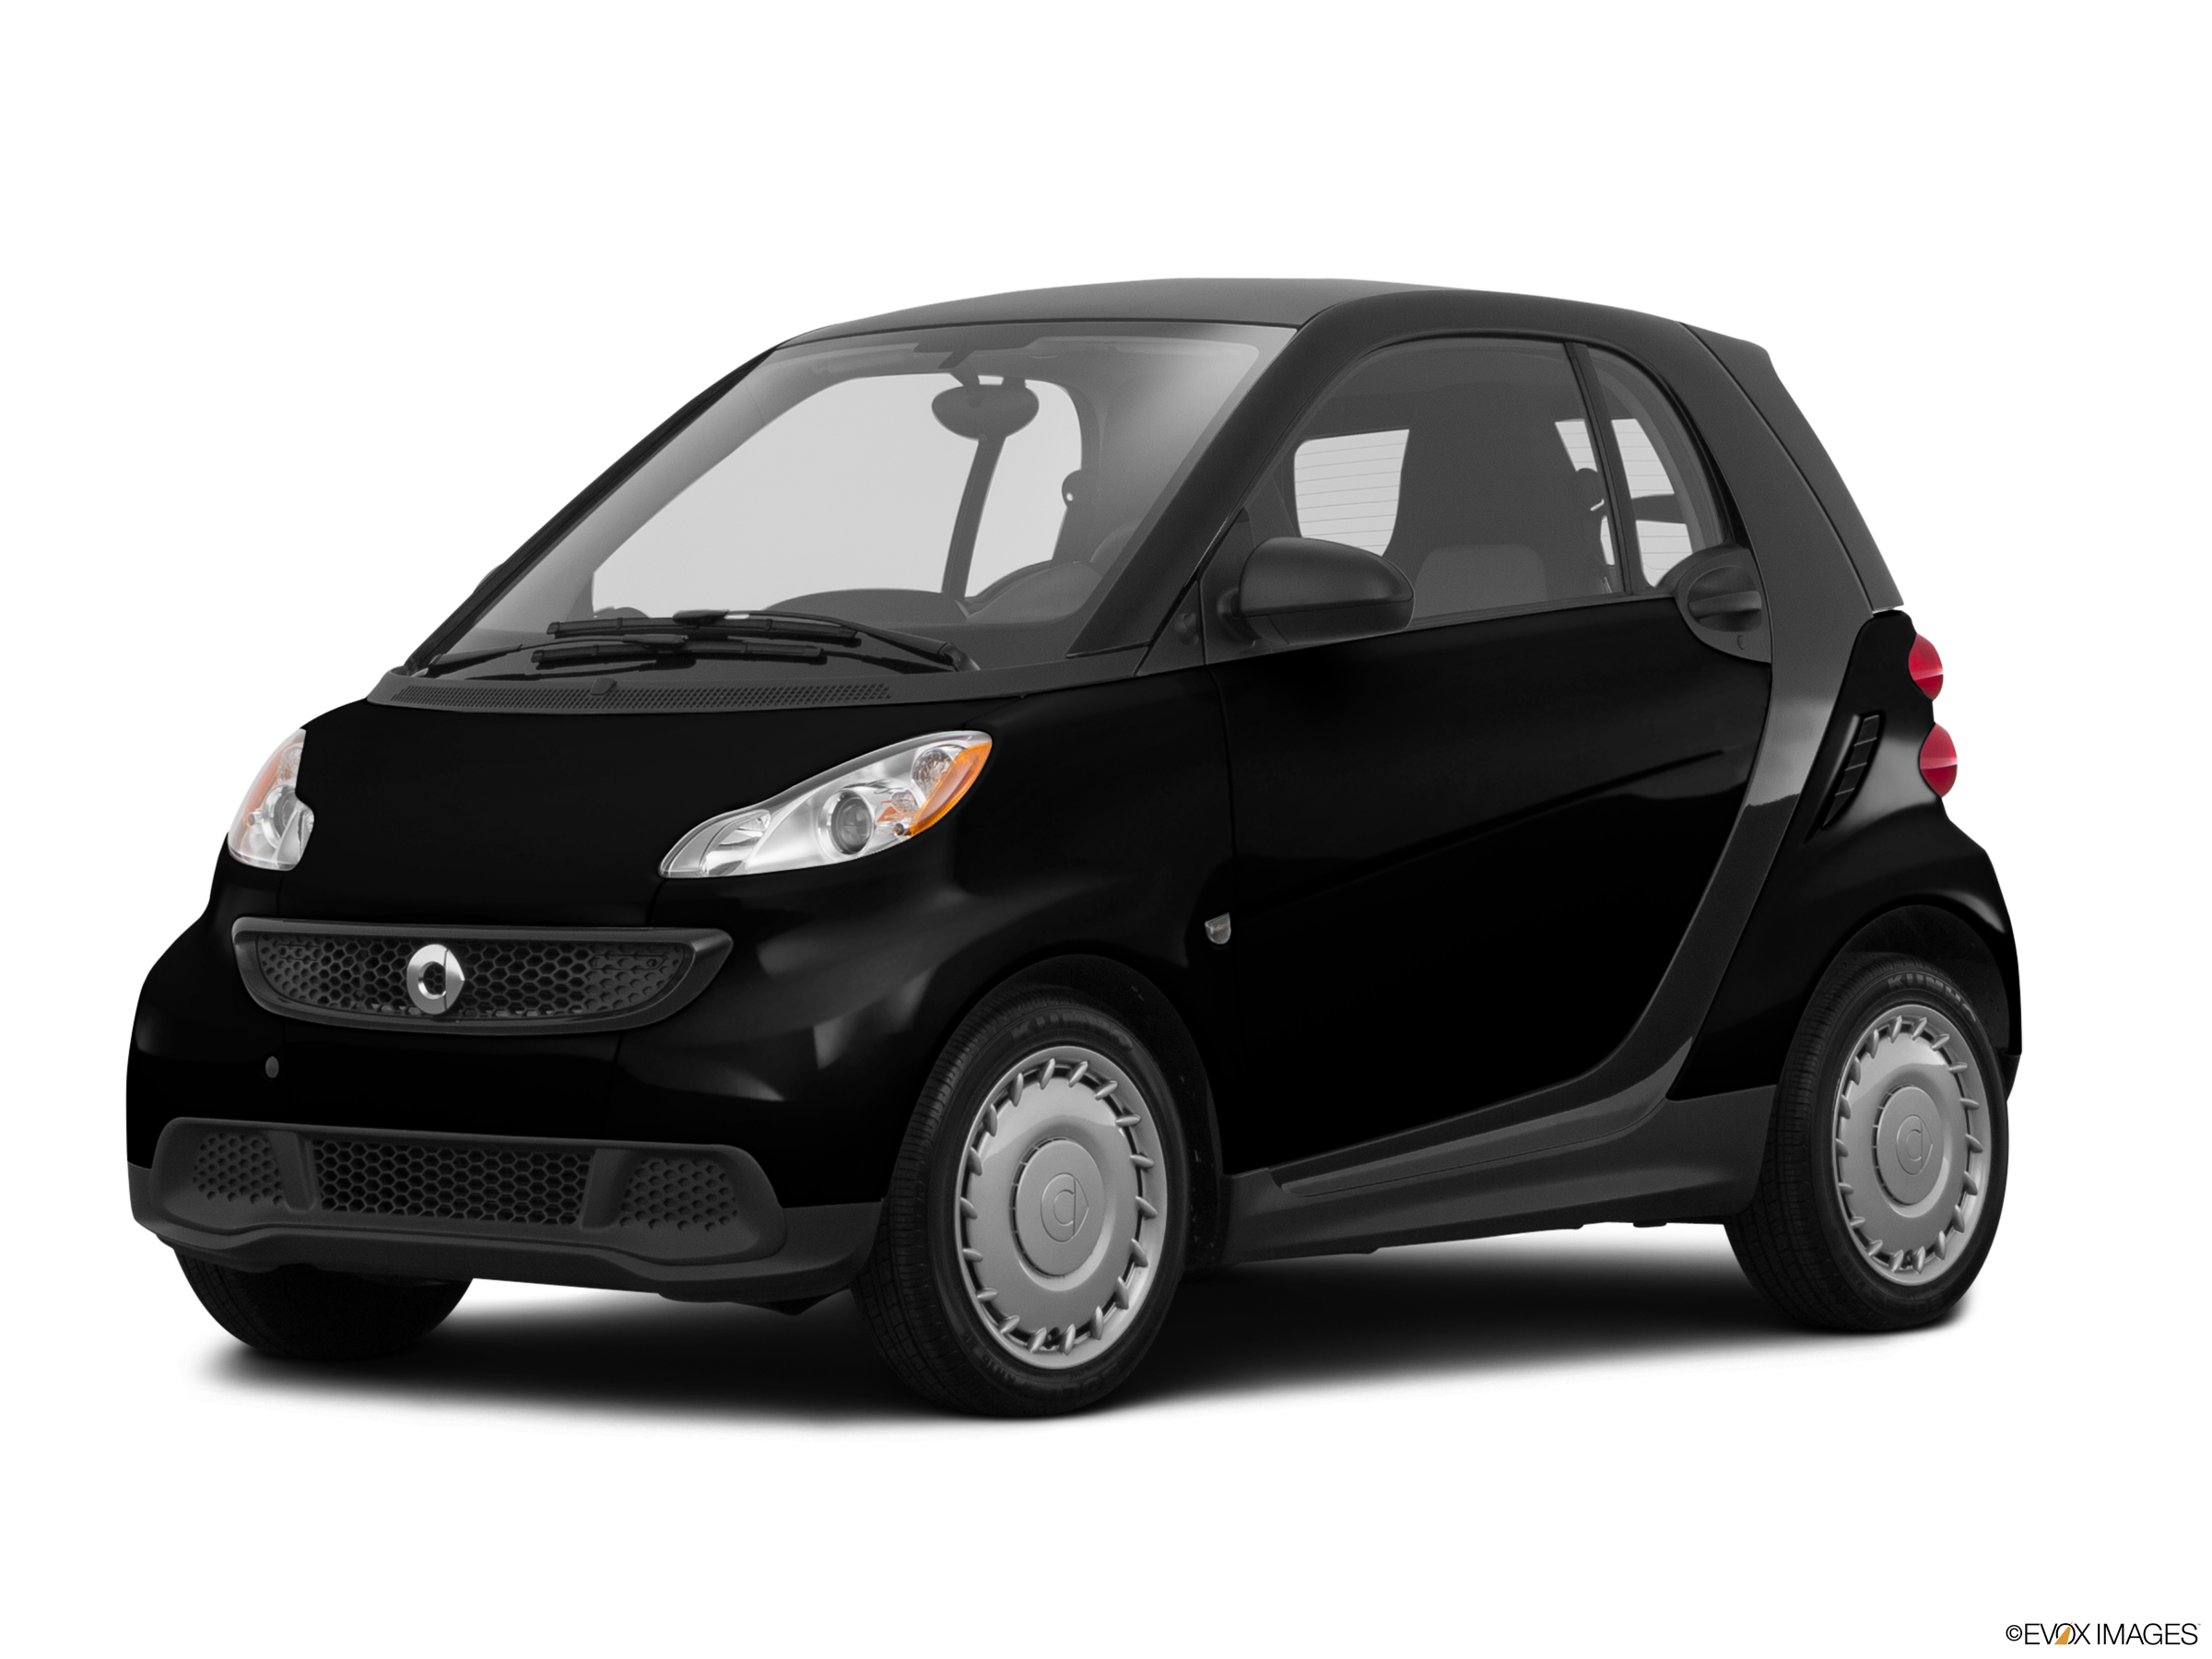 2009 smart fortwo Price, Value, Ratings & Reviews